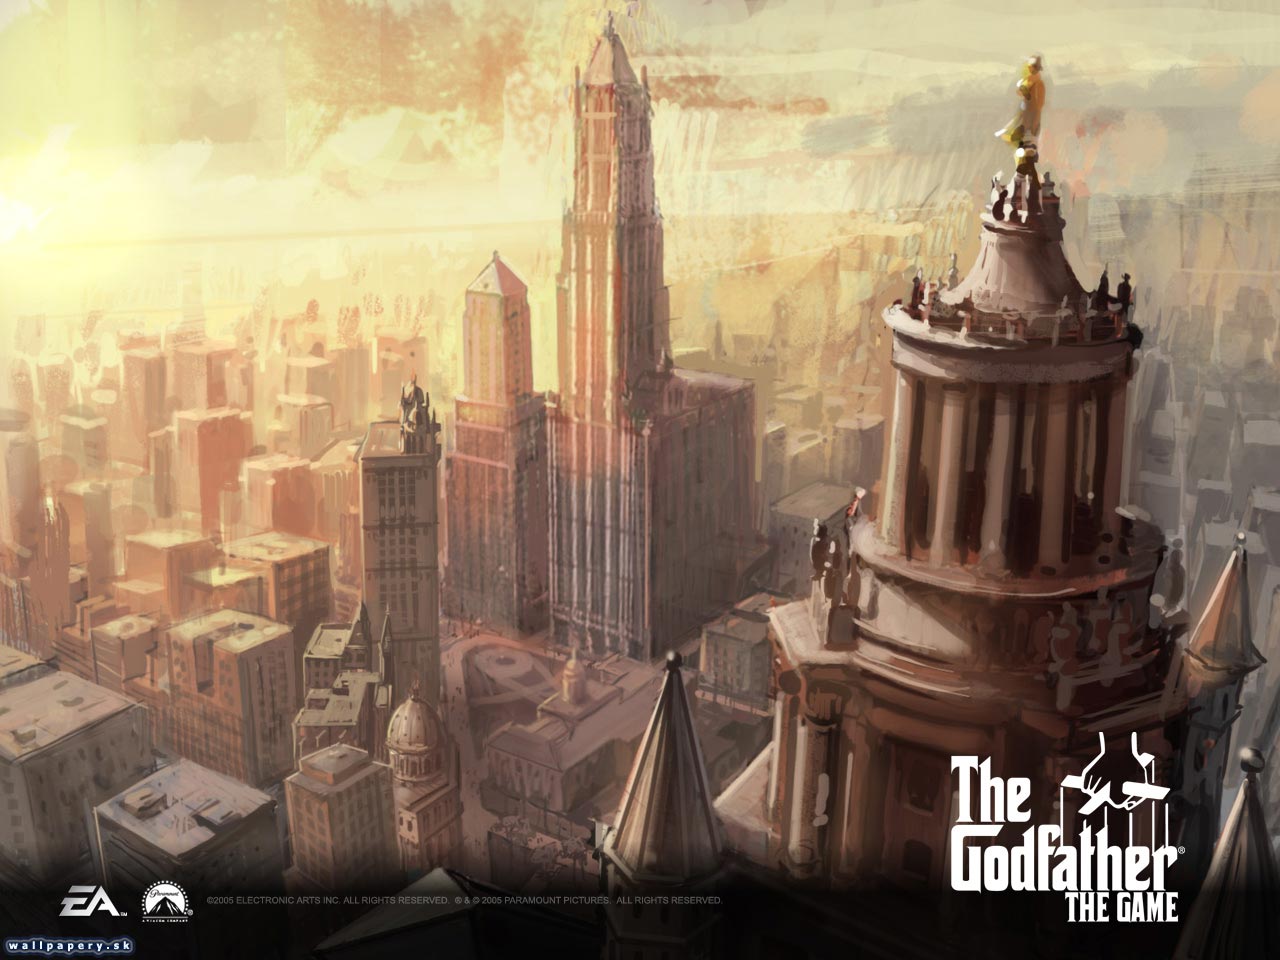 The Godfather - wallpaper 15